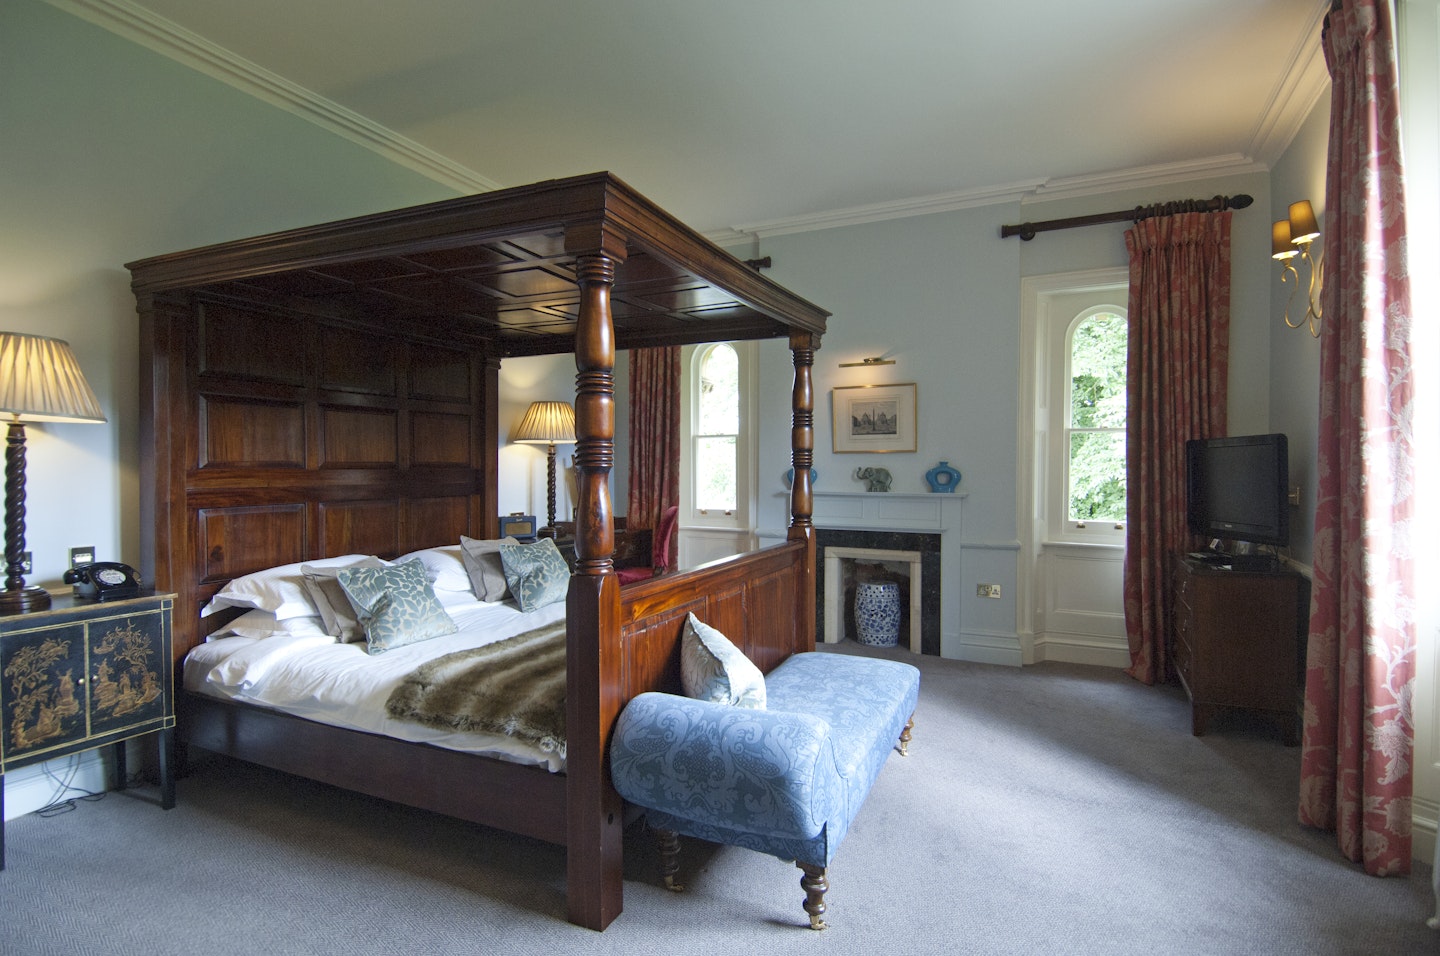 Beechfield House offers luxurious four-poster beds for a good night's sleep